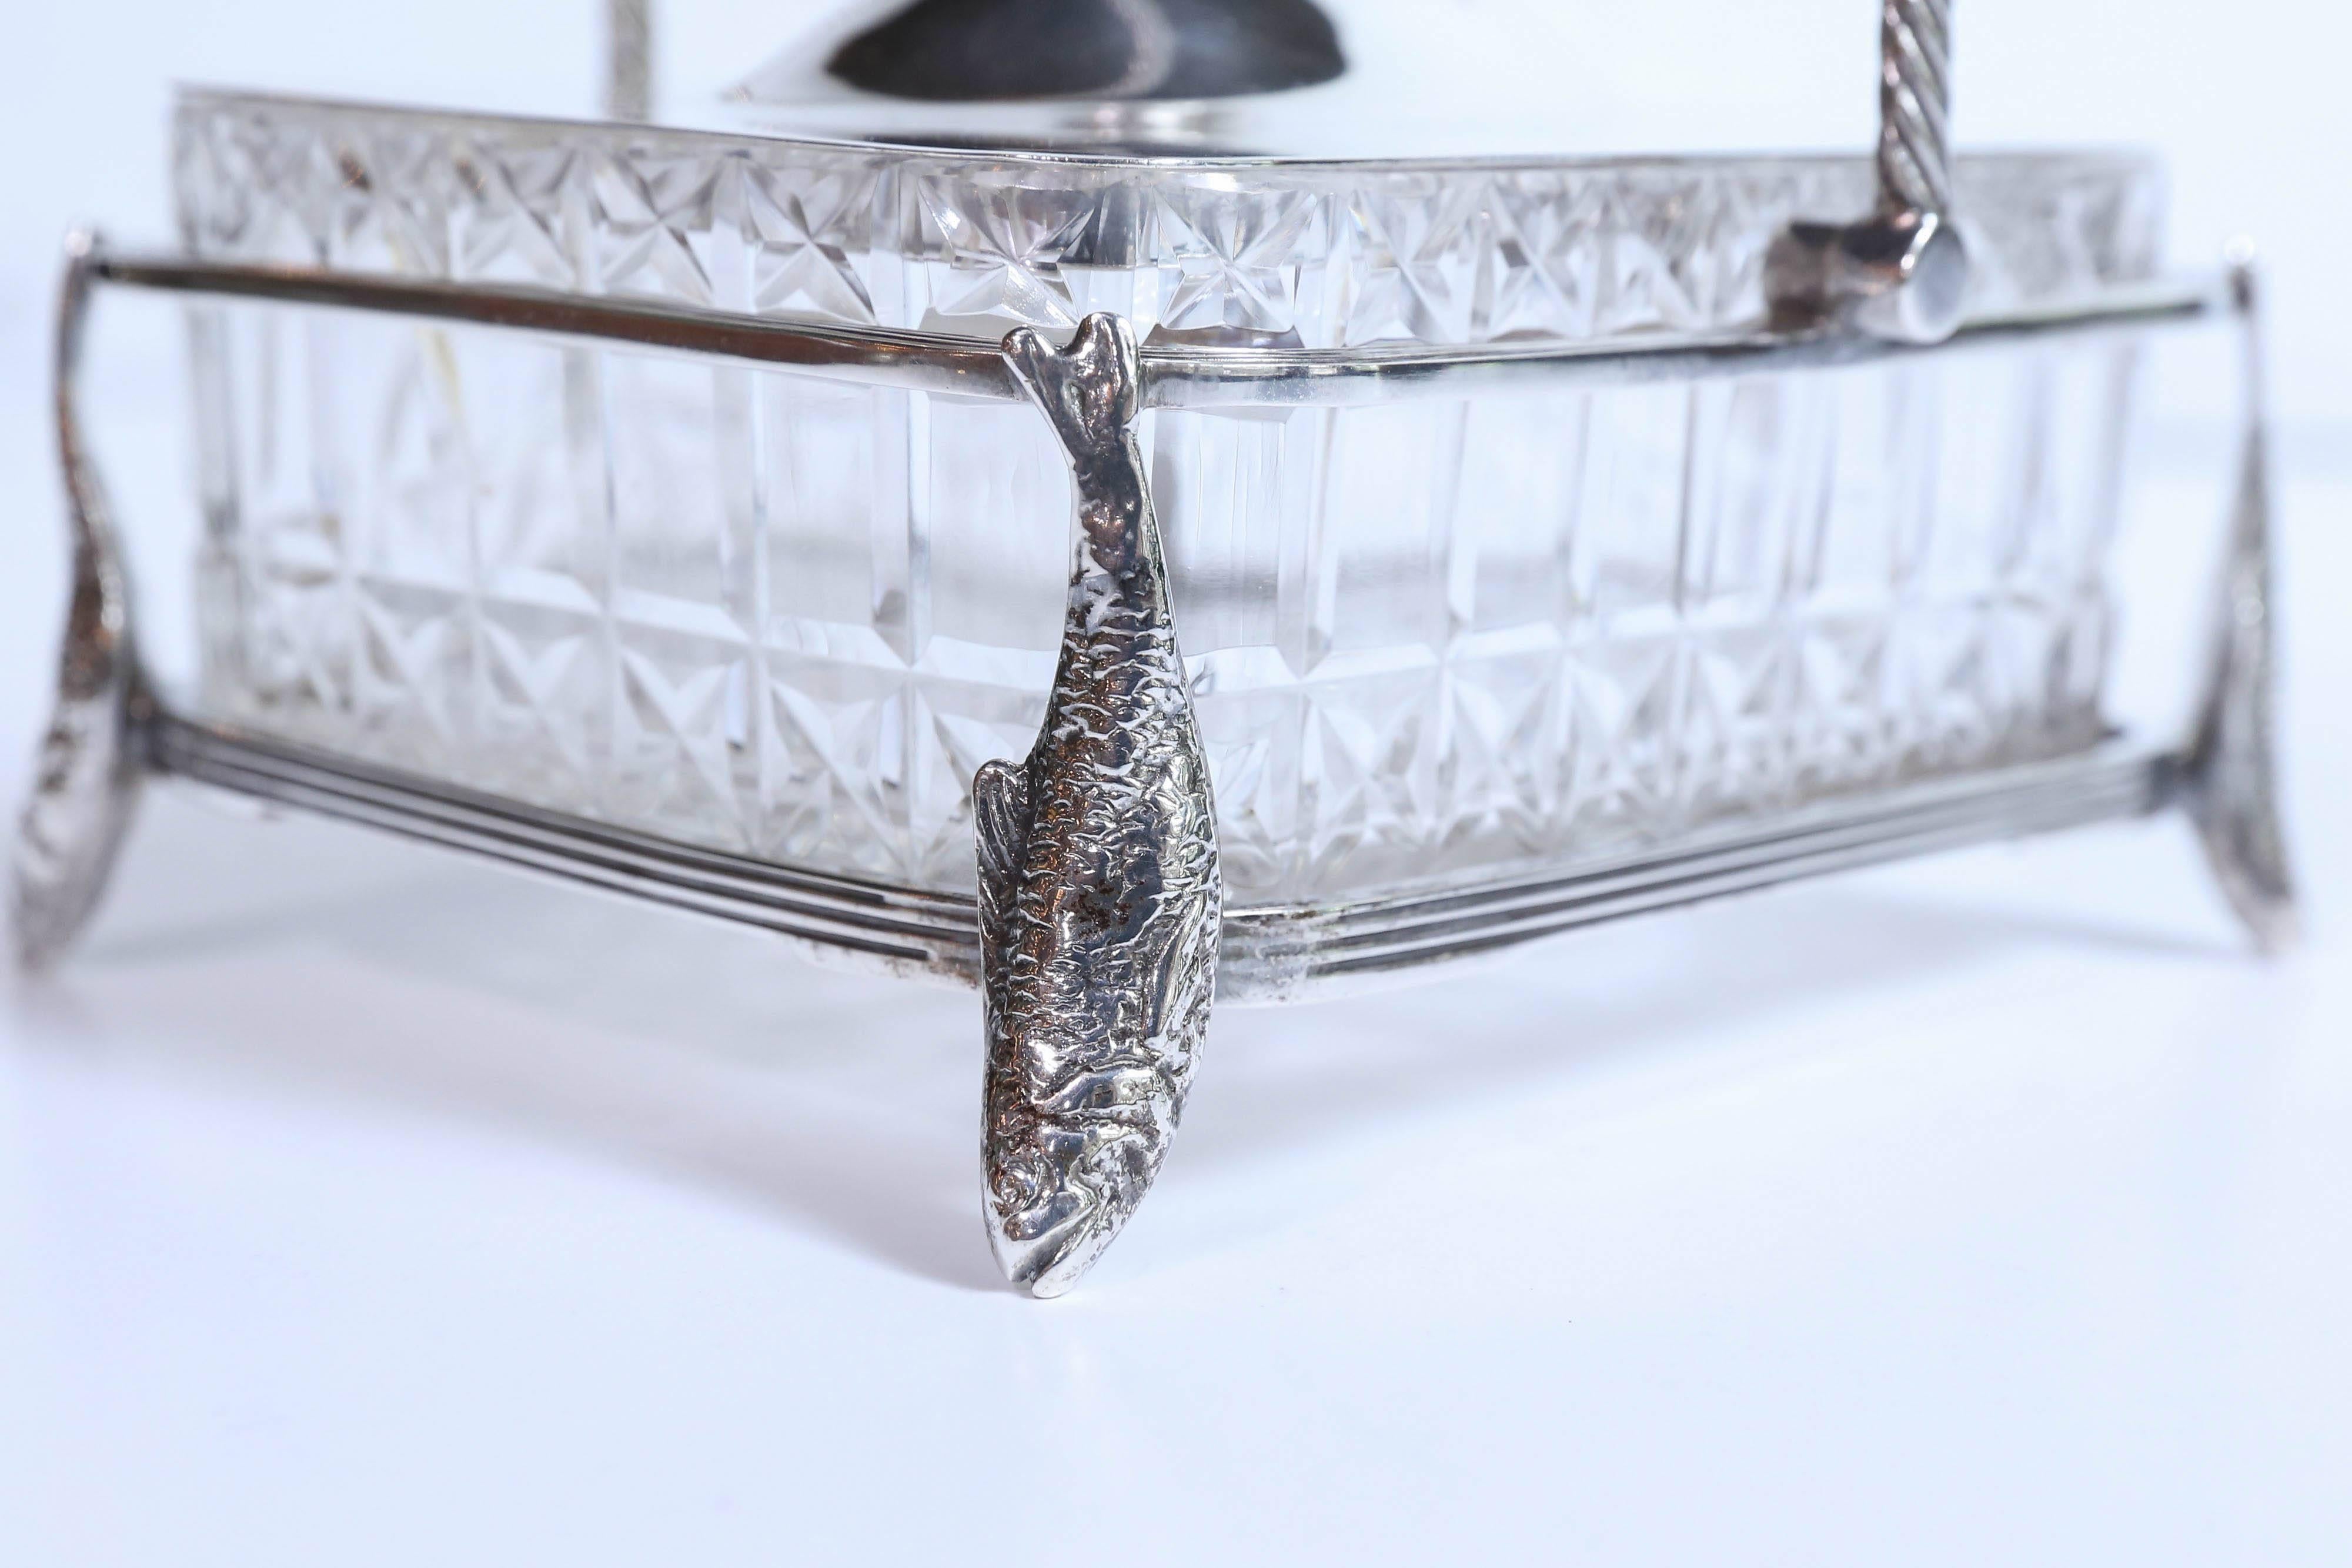 Lovely epns silver plated basket holding a crystal dish
Designed for serving sardines. A roped handle to move
The sever enhances this beautiful dish. Fish designs form the 
Feet on all four corners
The liner is made of crystal. The top is domed